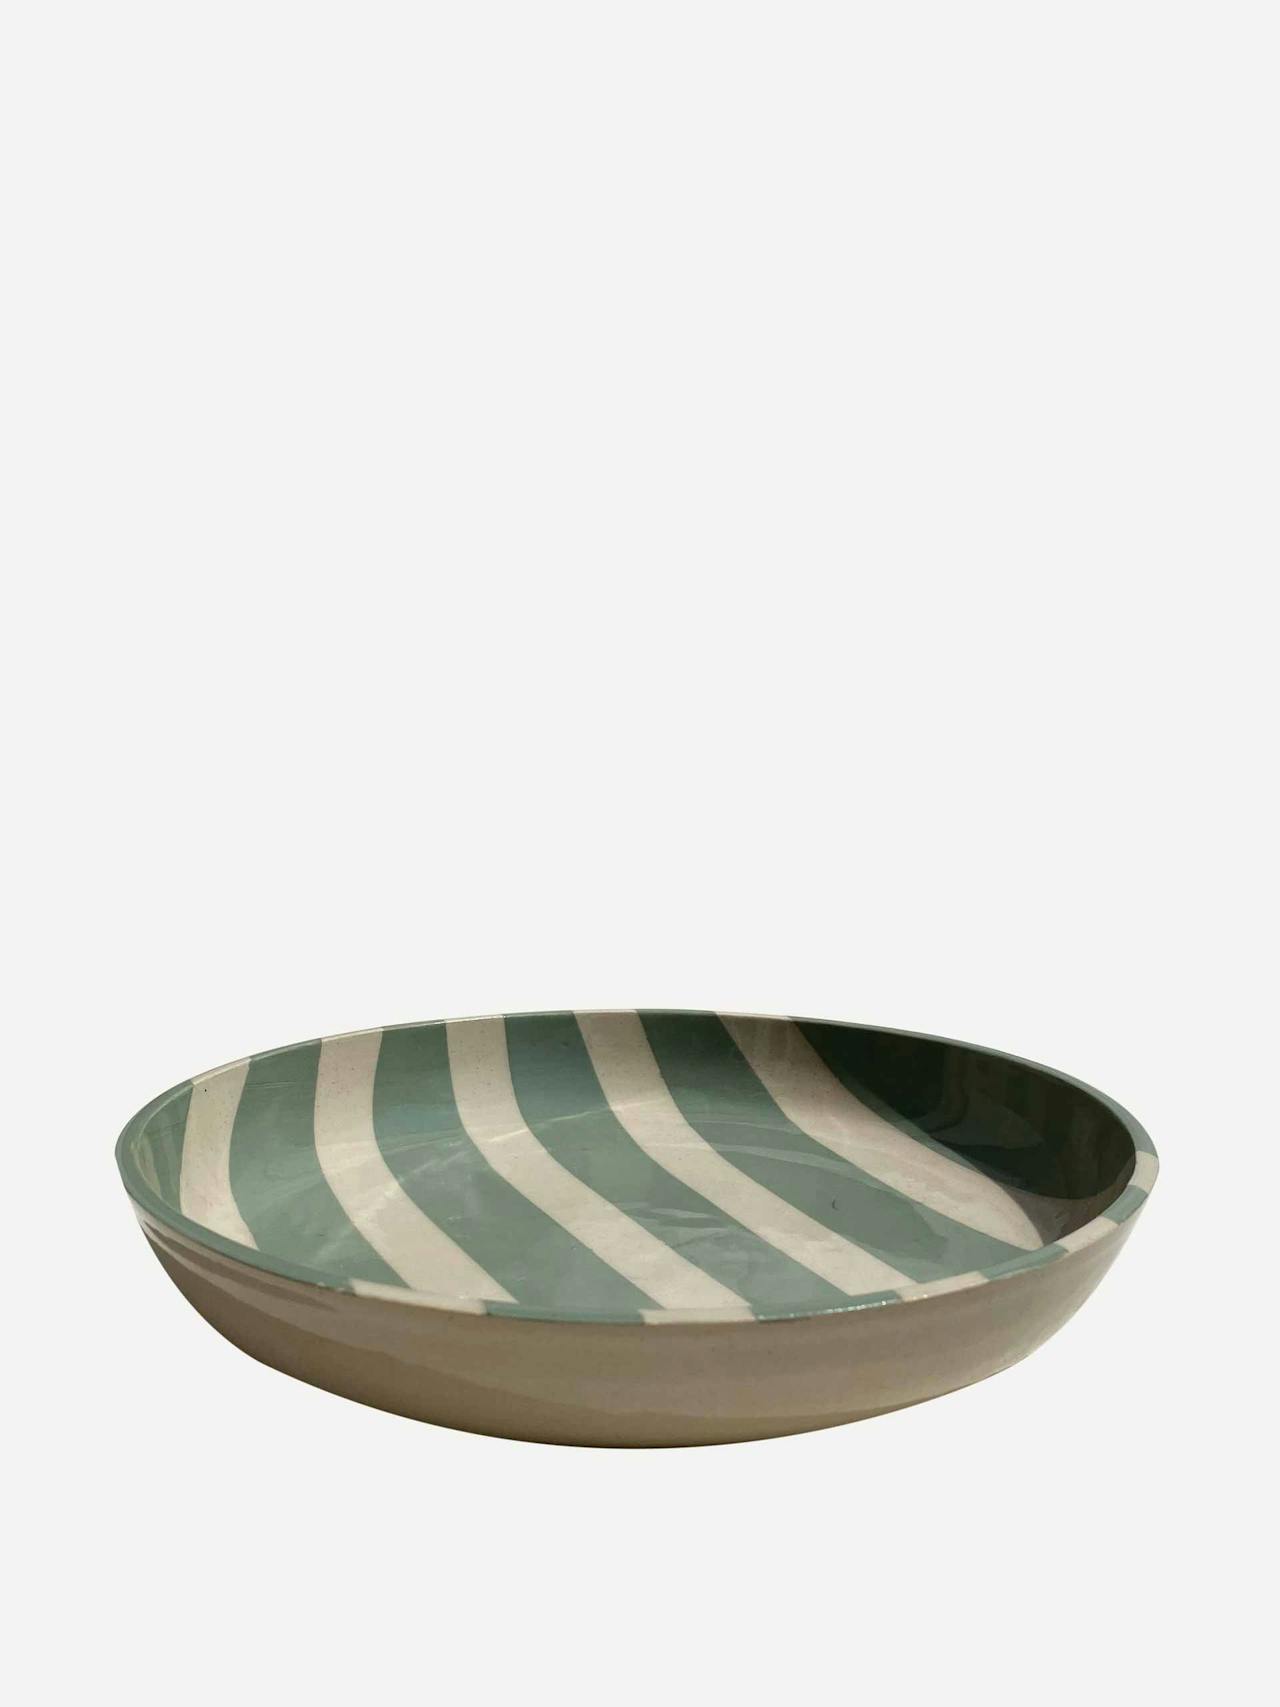 Duci striped bowl in green